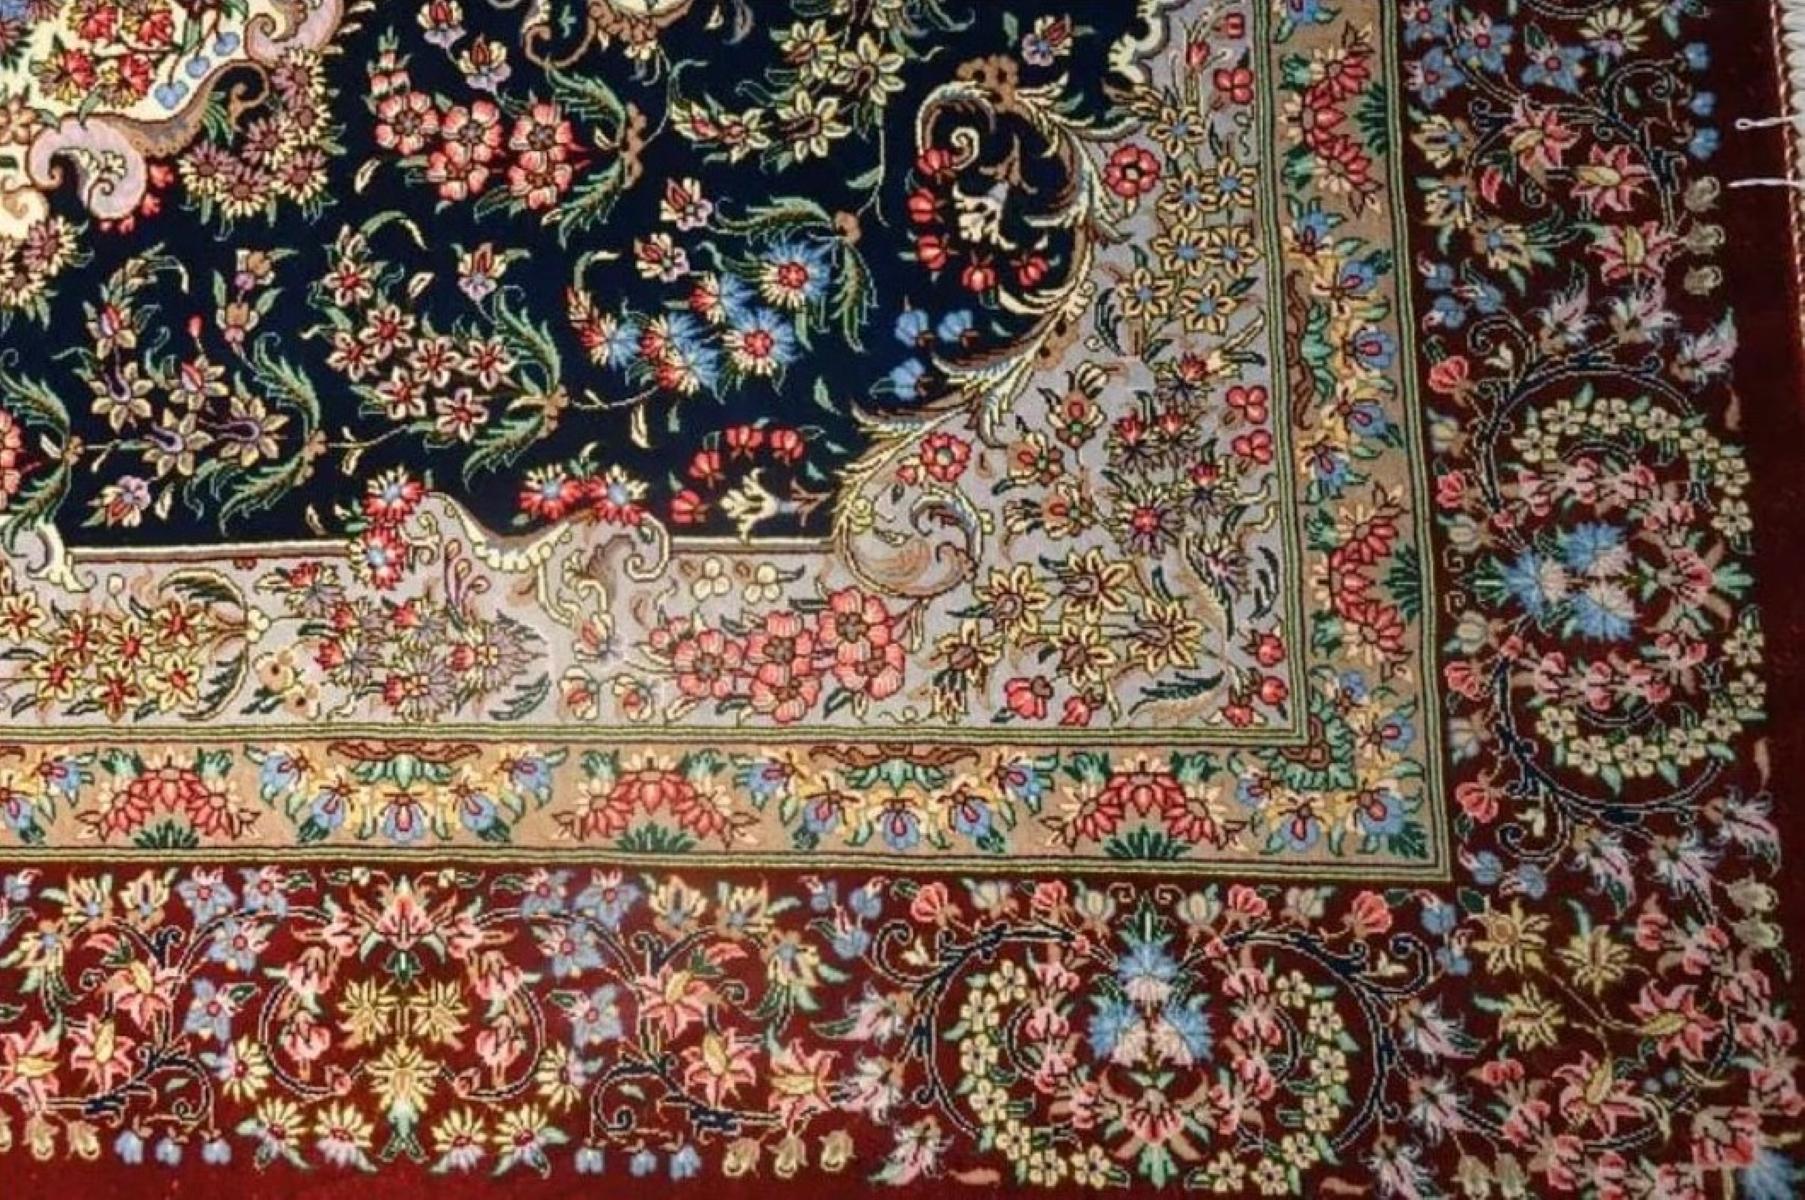 Very fine Persian Rug Qum 700 Knots per inch, Size 4.9 x 3.1 Iran Qum Shafiee Silk and Silk foundation. Around 1,500,000 knots tied by hand one by one. It takes a year to complete this piece of art.